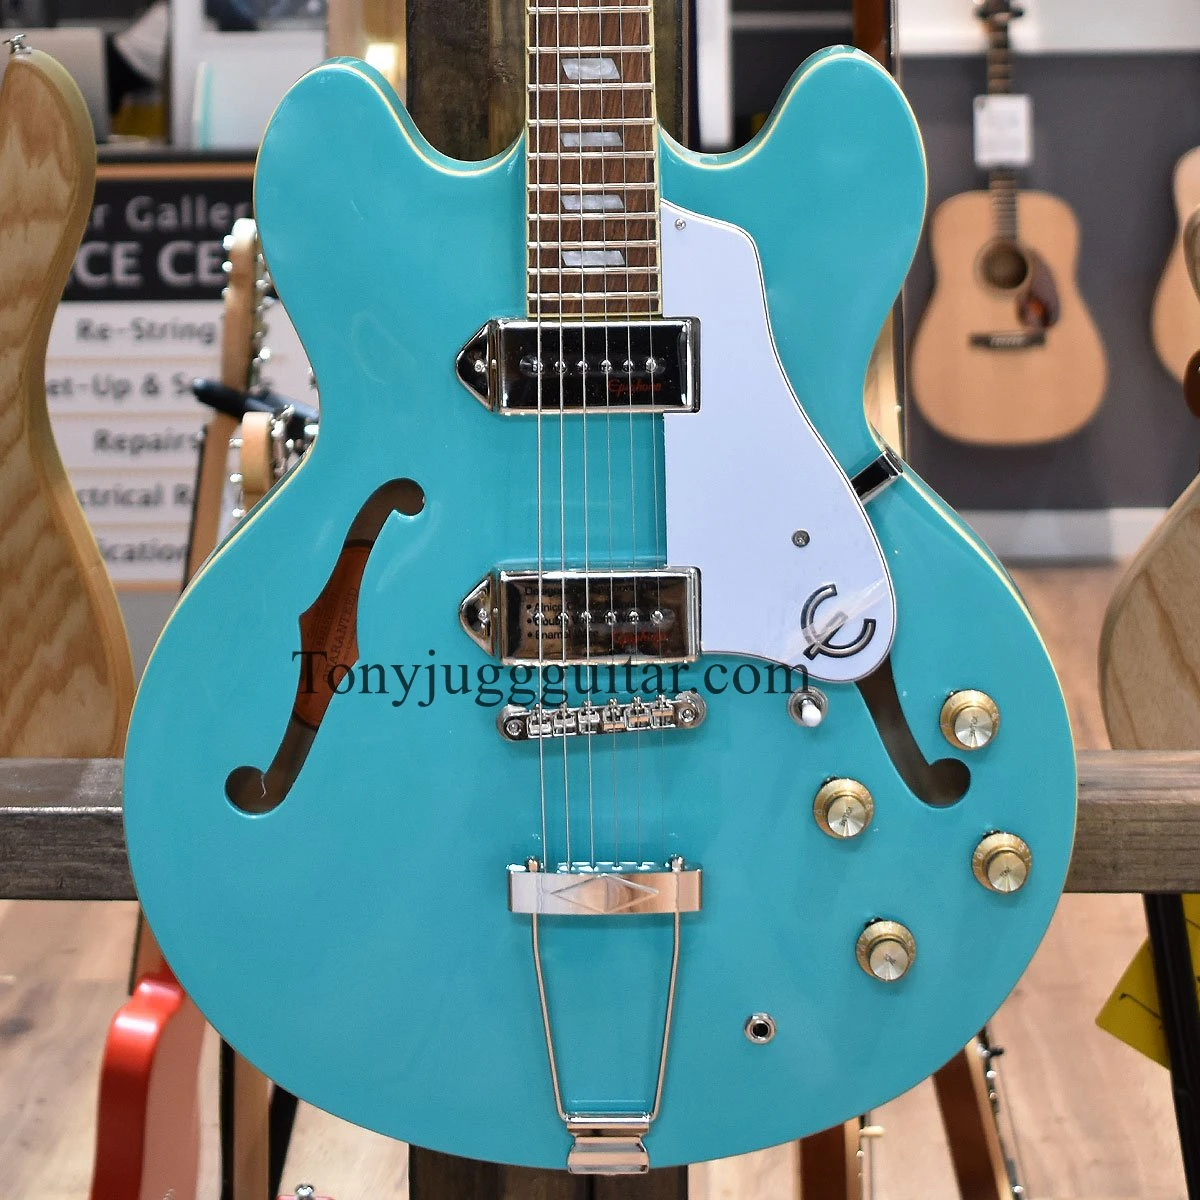 

JohnLennon Revolution Casino Hollow Body Jazz 335 Electric Guitar Turquoise Blonde Finished Metal Tailpiece White Pickguard